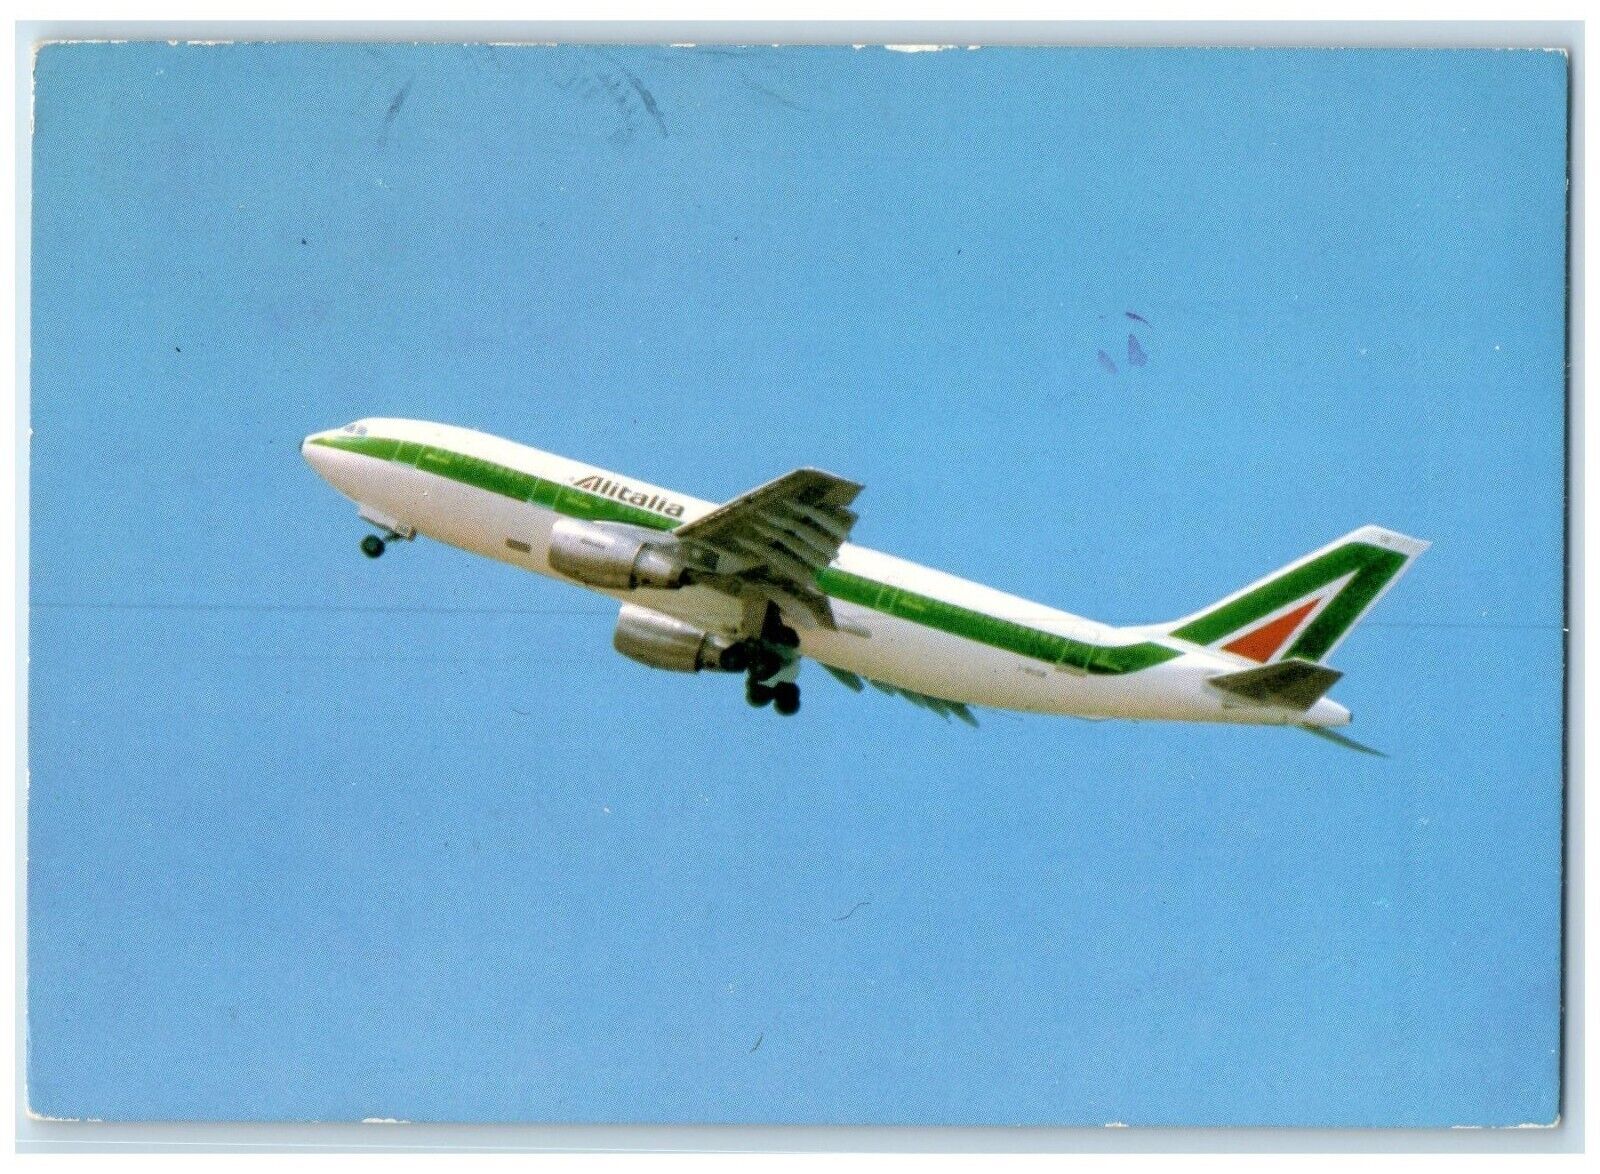 1920 Alitalia Airlines Airbus A 300 B4 200 Posted Vintage Postcard